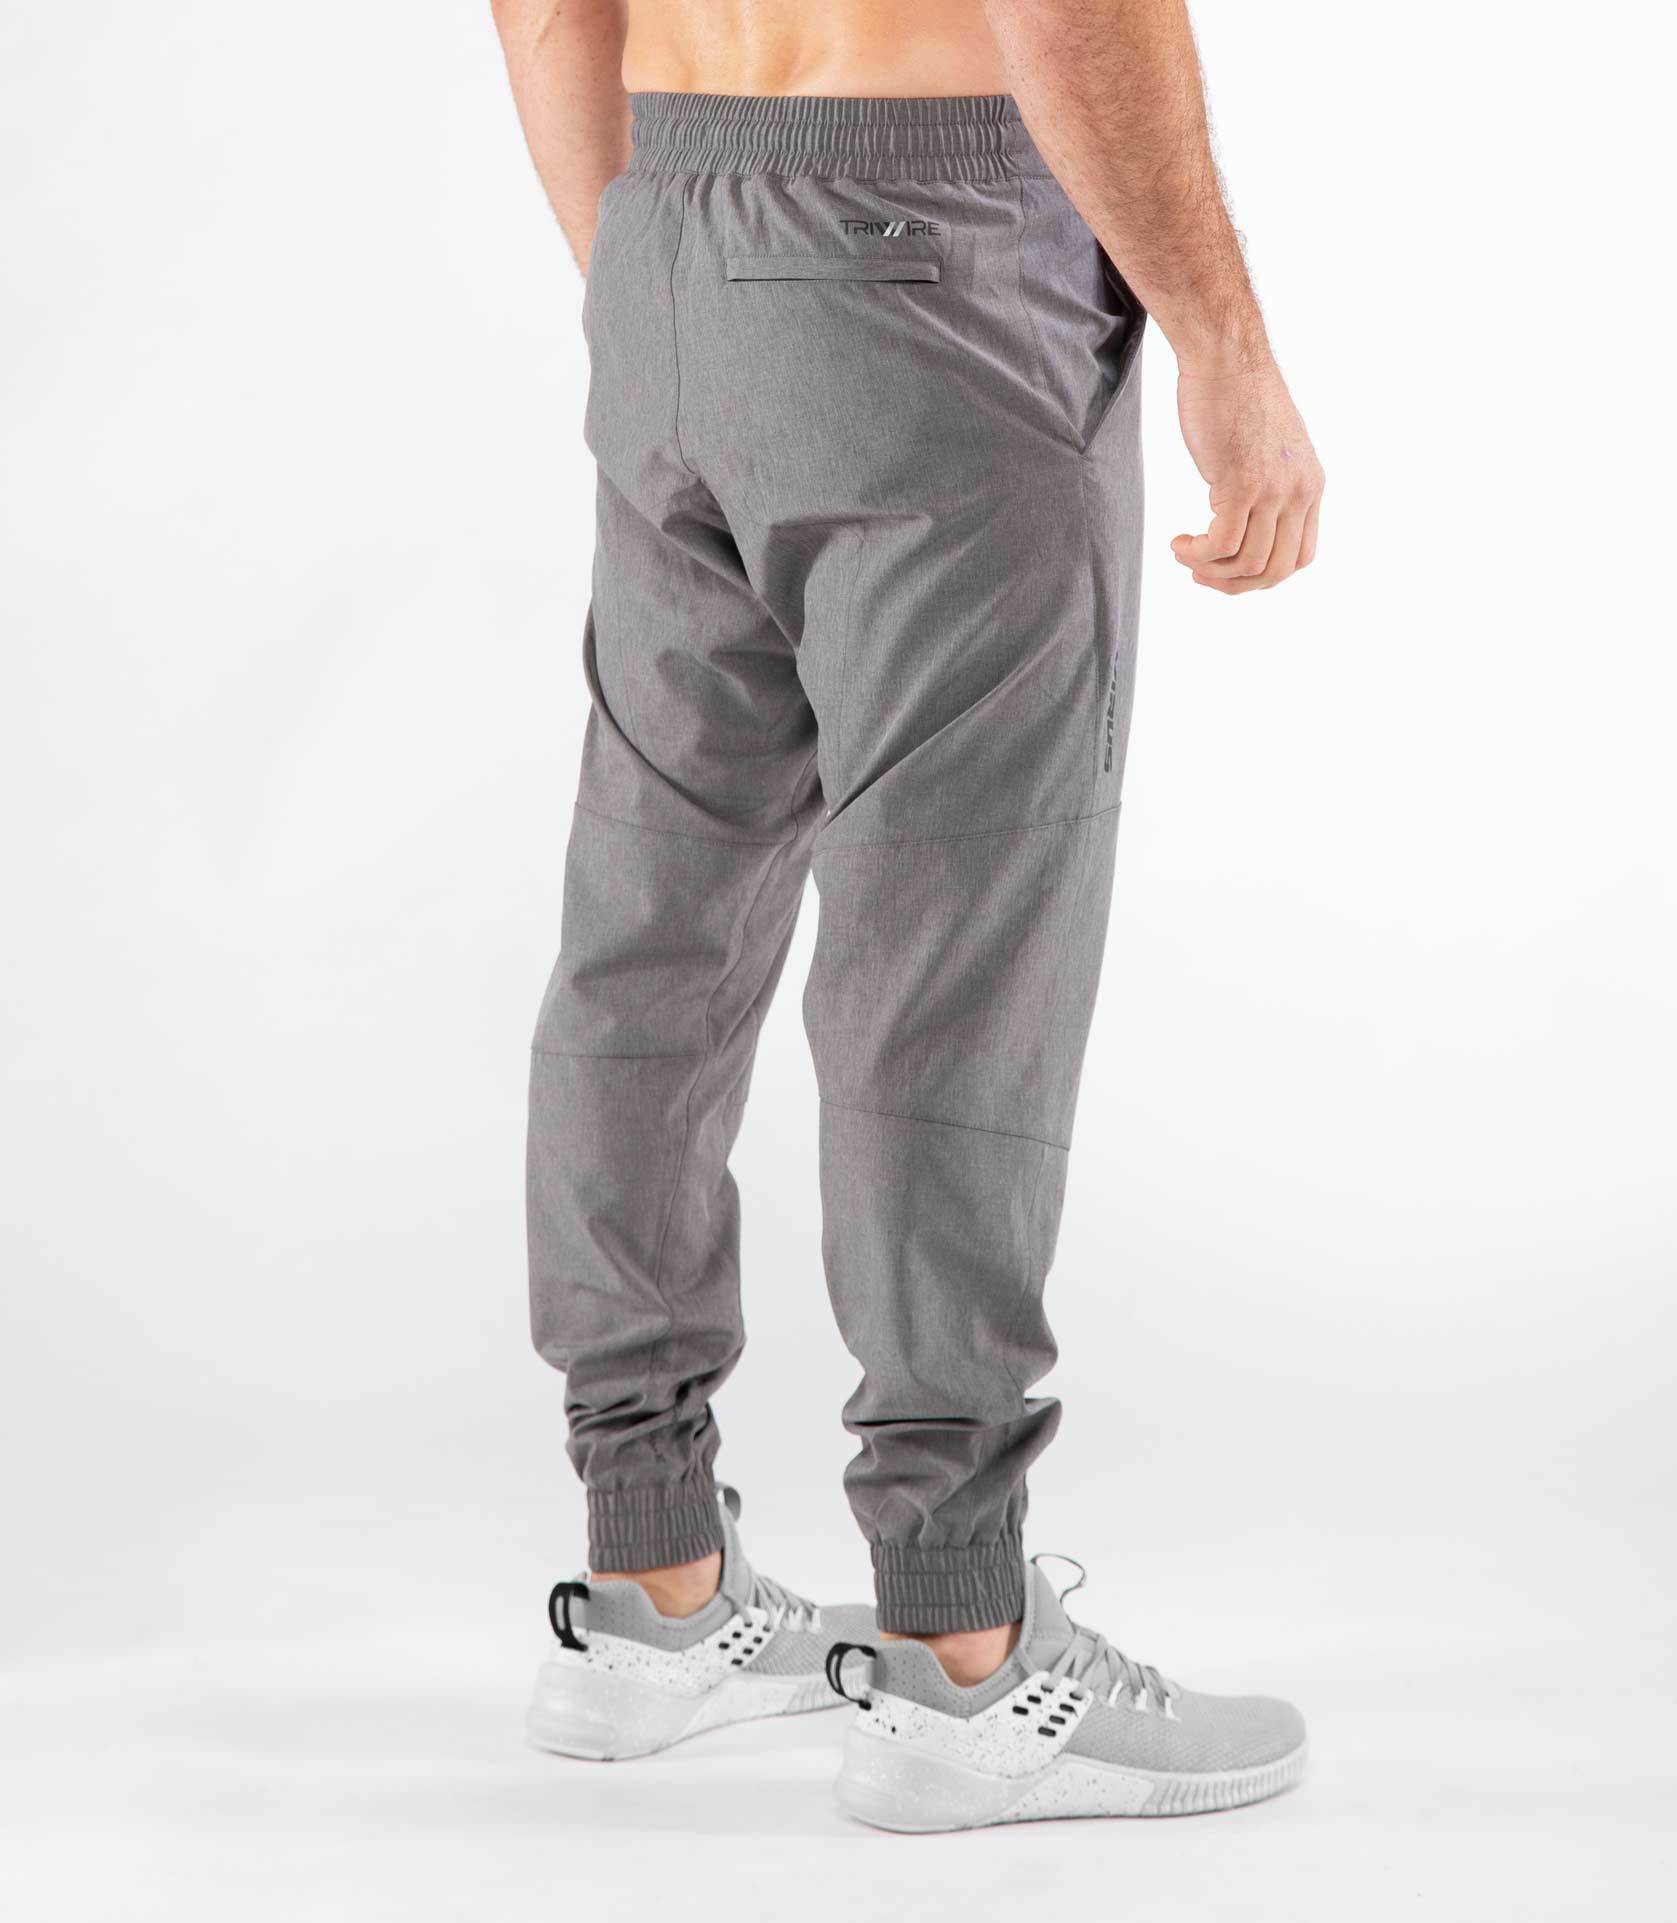 TRIWIRE TRAIN PANT - Heather Gray - Force Sports Store